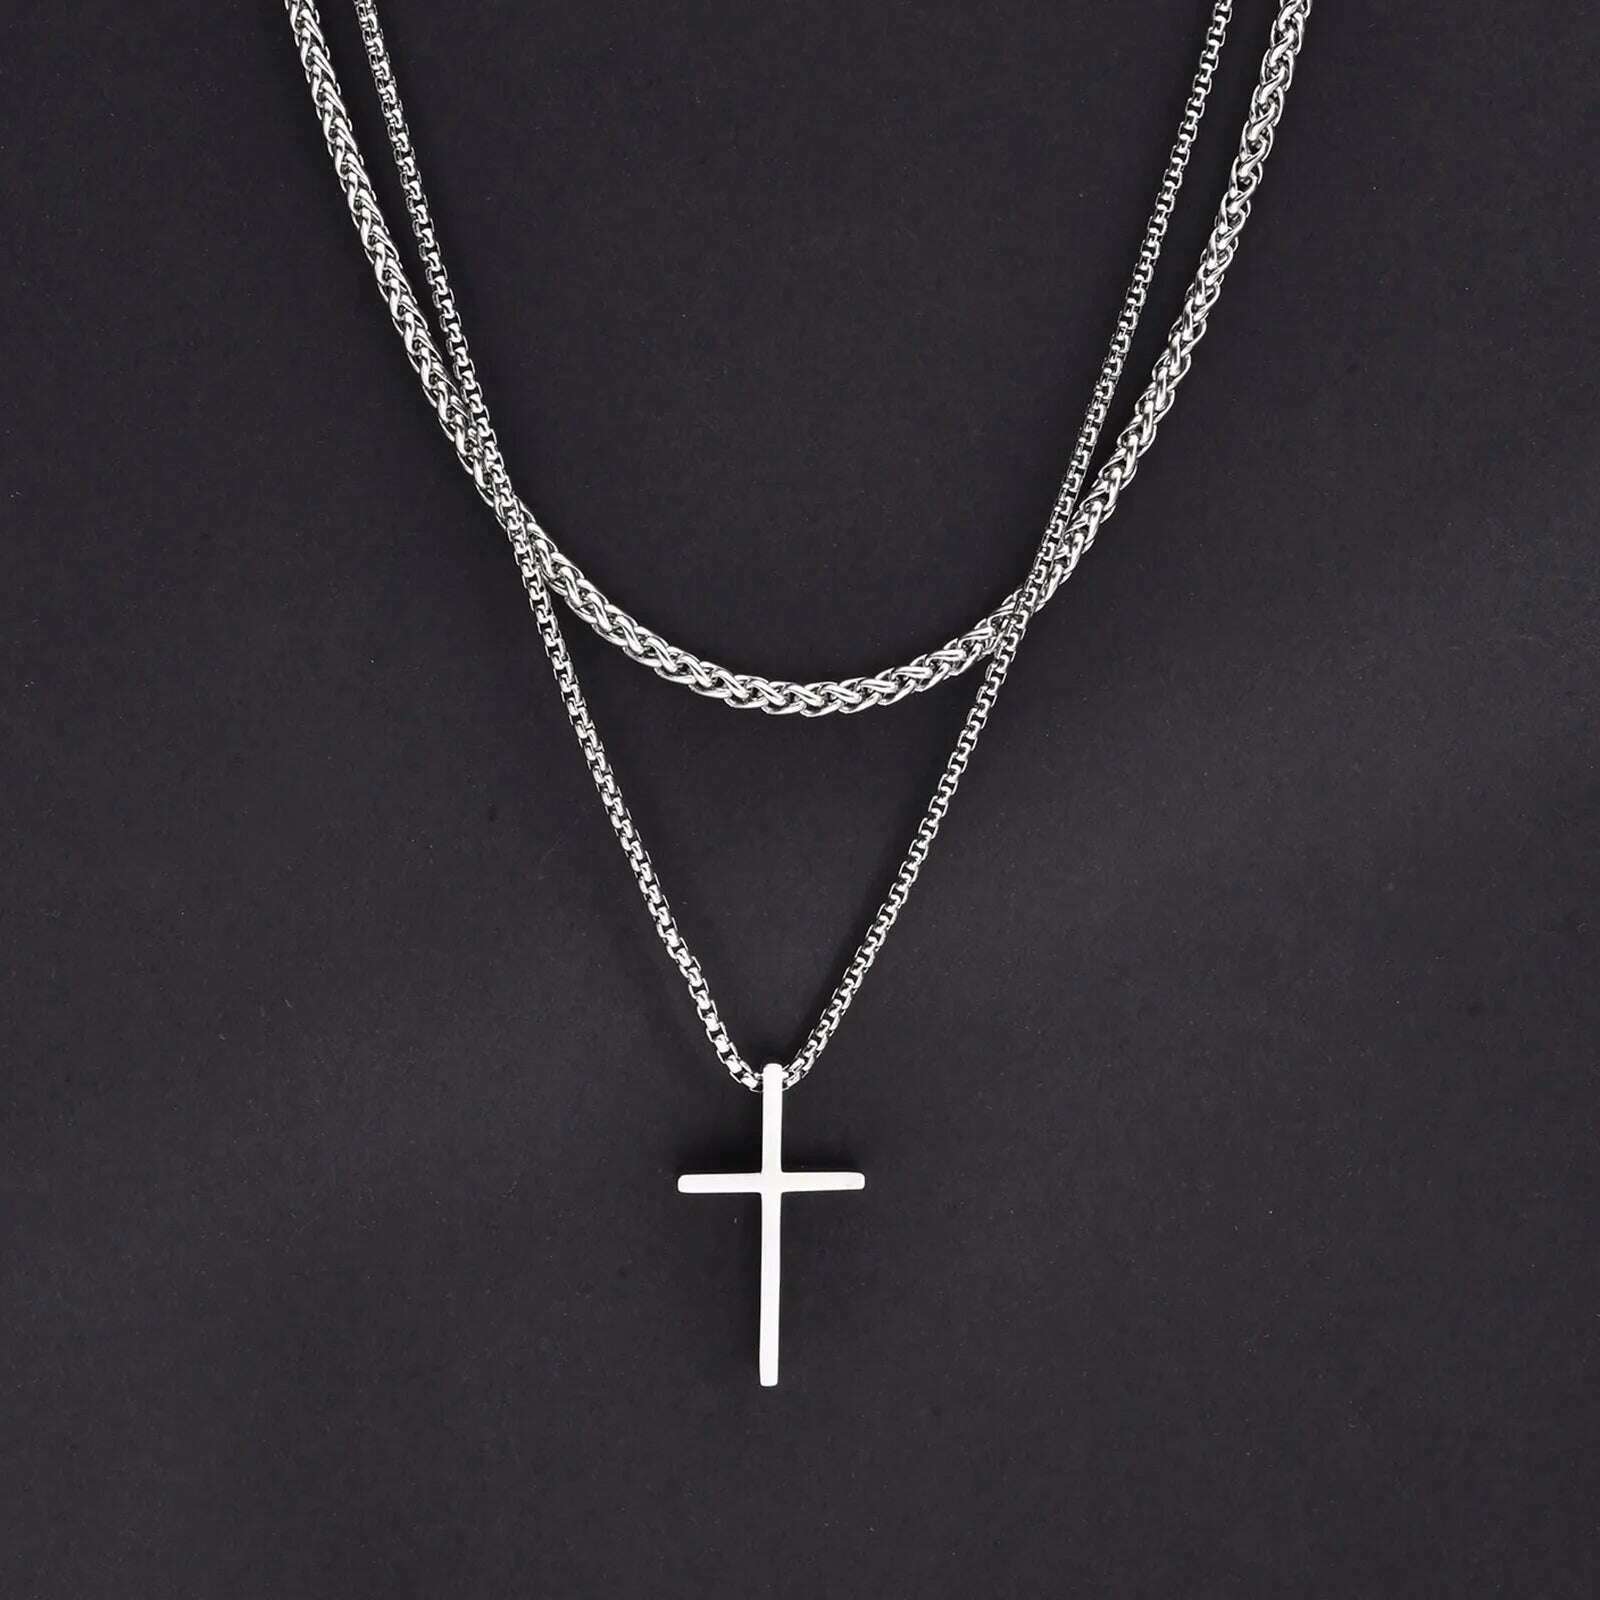 KIMLUD, Vnox Mens Cross Necklaces, Stainless Steel Layered Plain Cross Pendant, Rope Box Chain Necklace, Simple Prayer Jesus Collar, NC-1035S NC-104-50S, KIMLUD Womens Clothes